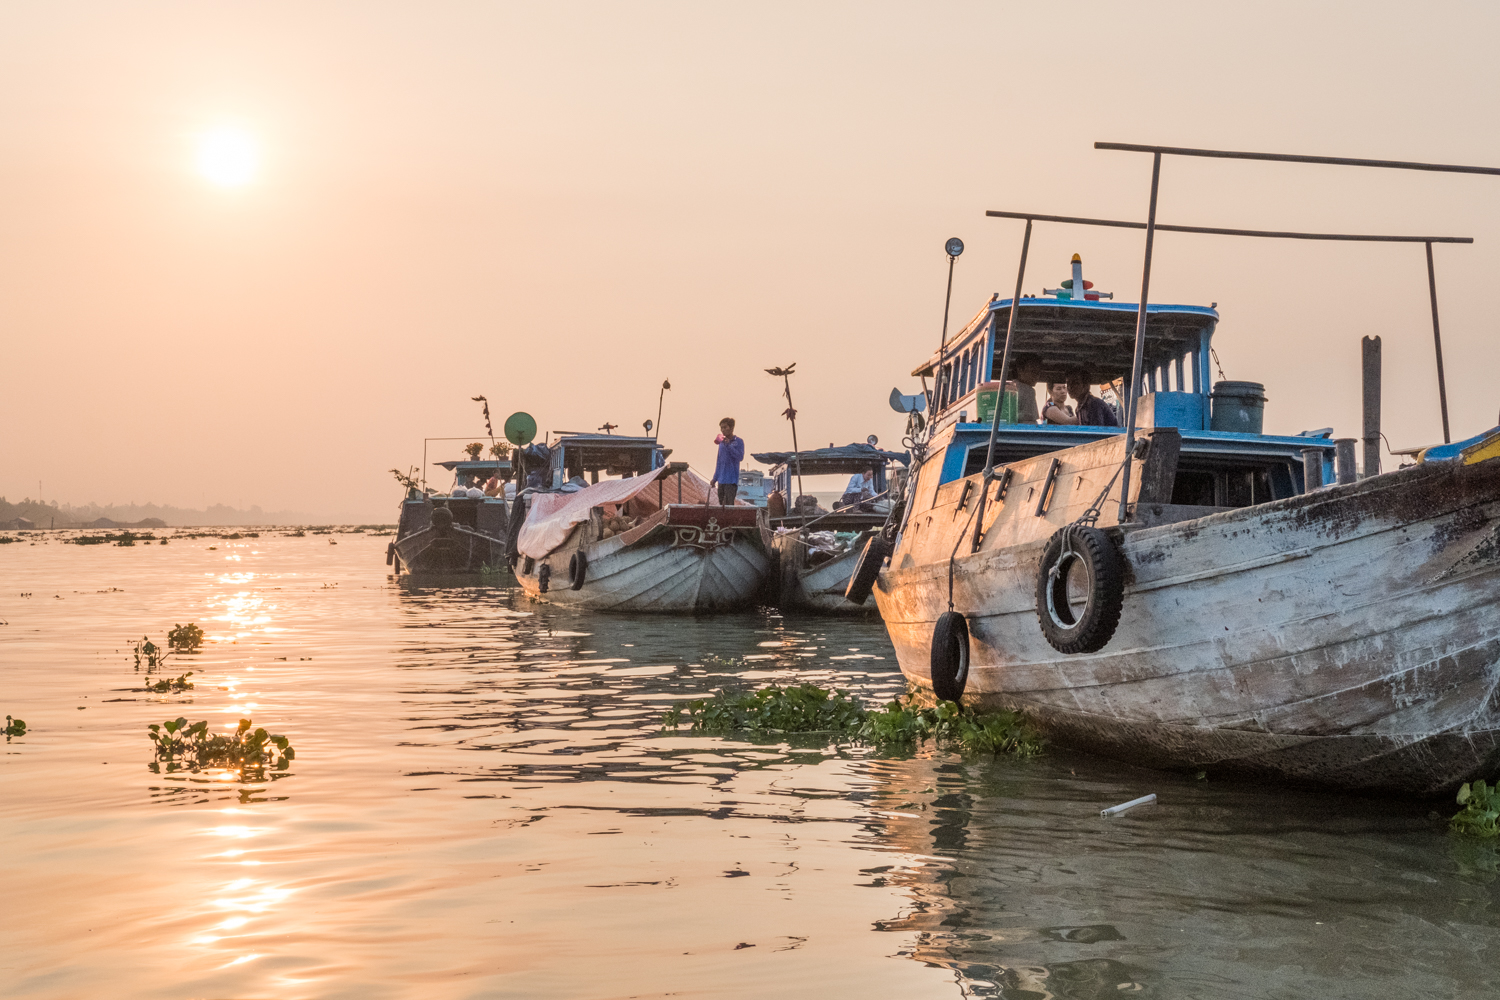  In Chau Doc, Vietnam, boats line up at sunrise to prepare for selling goods at the floating market. 